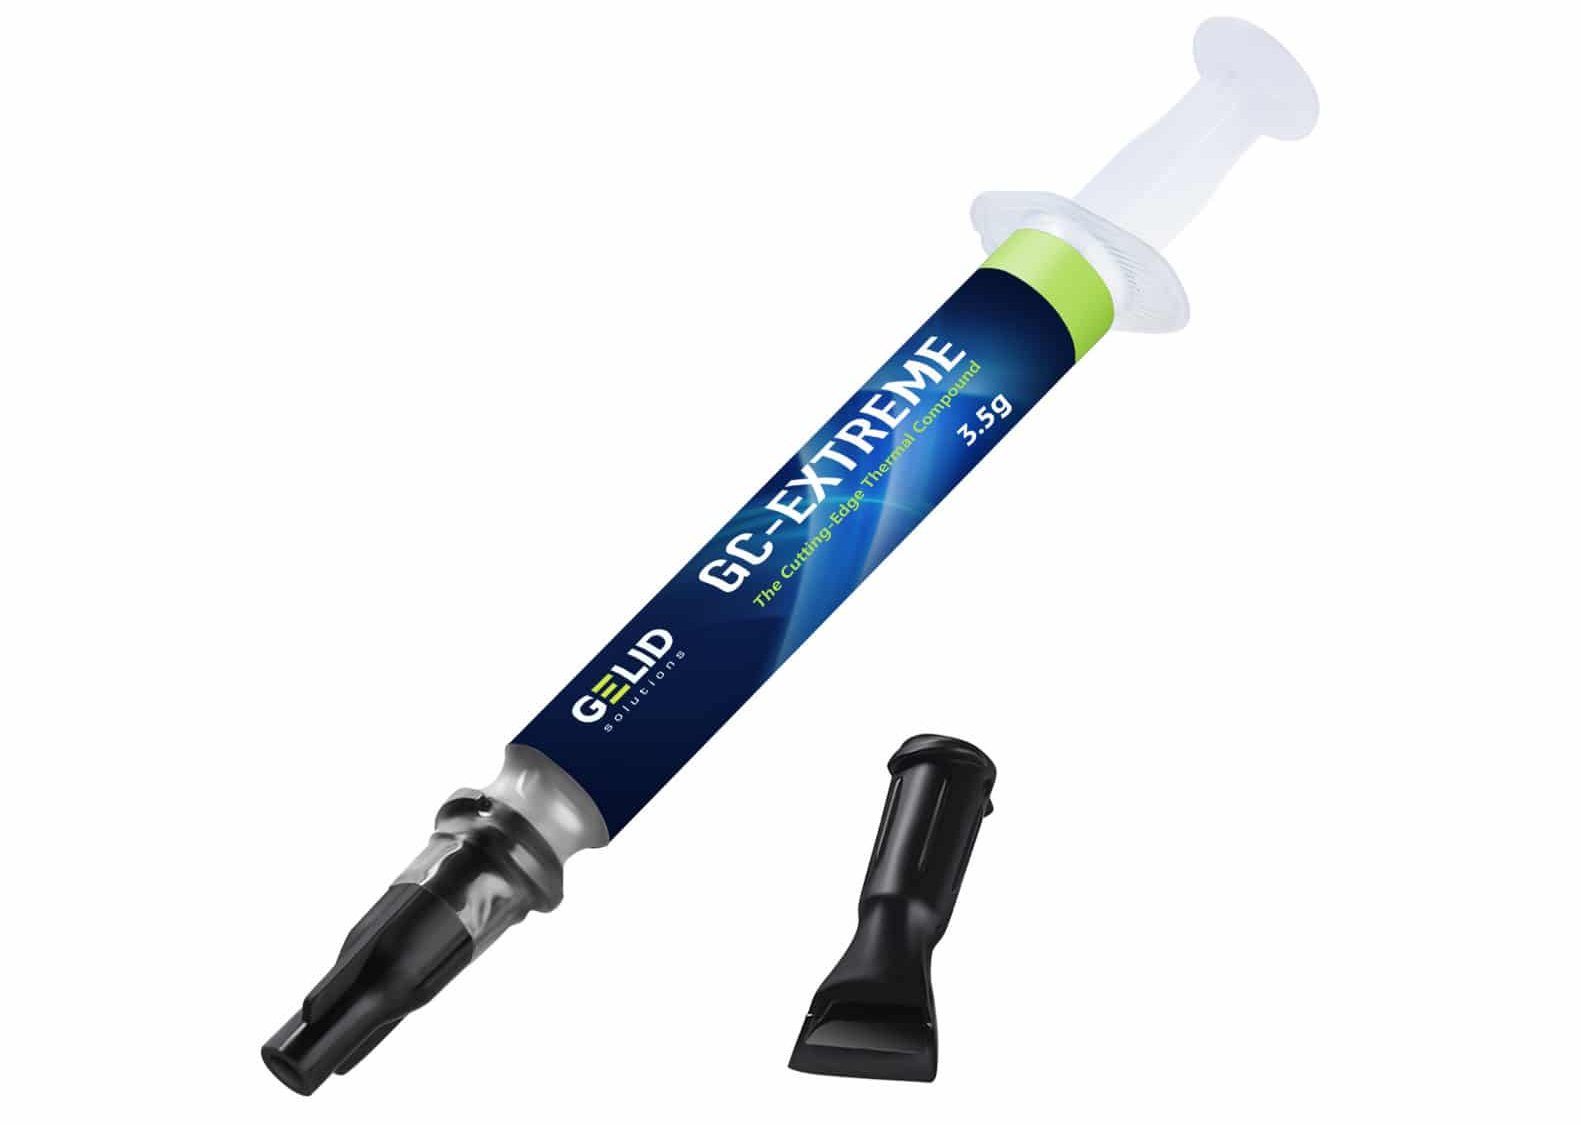 Gelid GC Thermal Compound